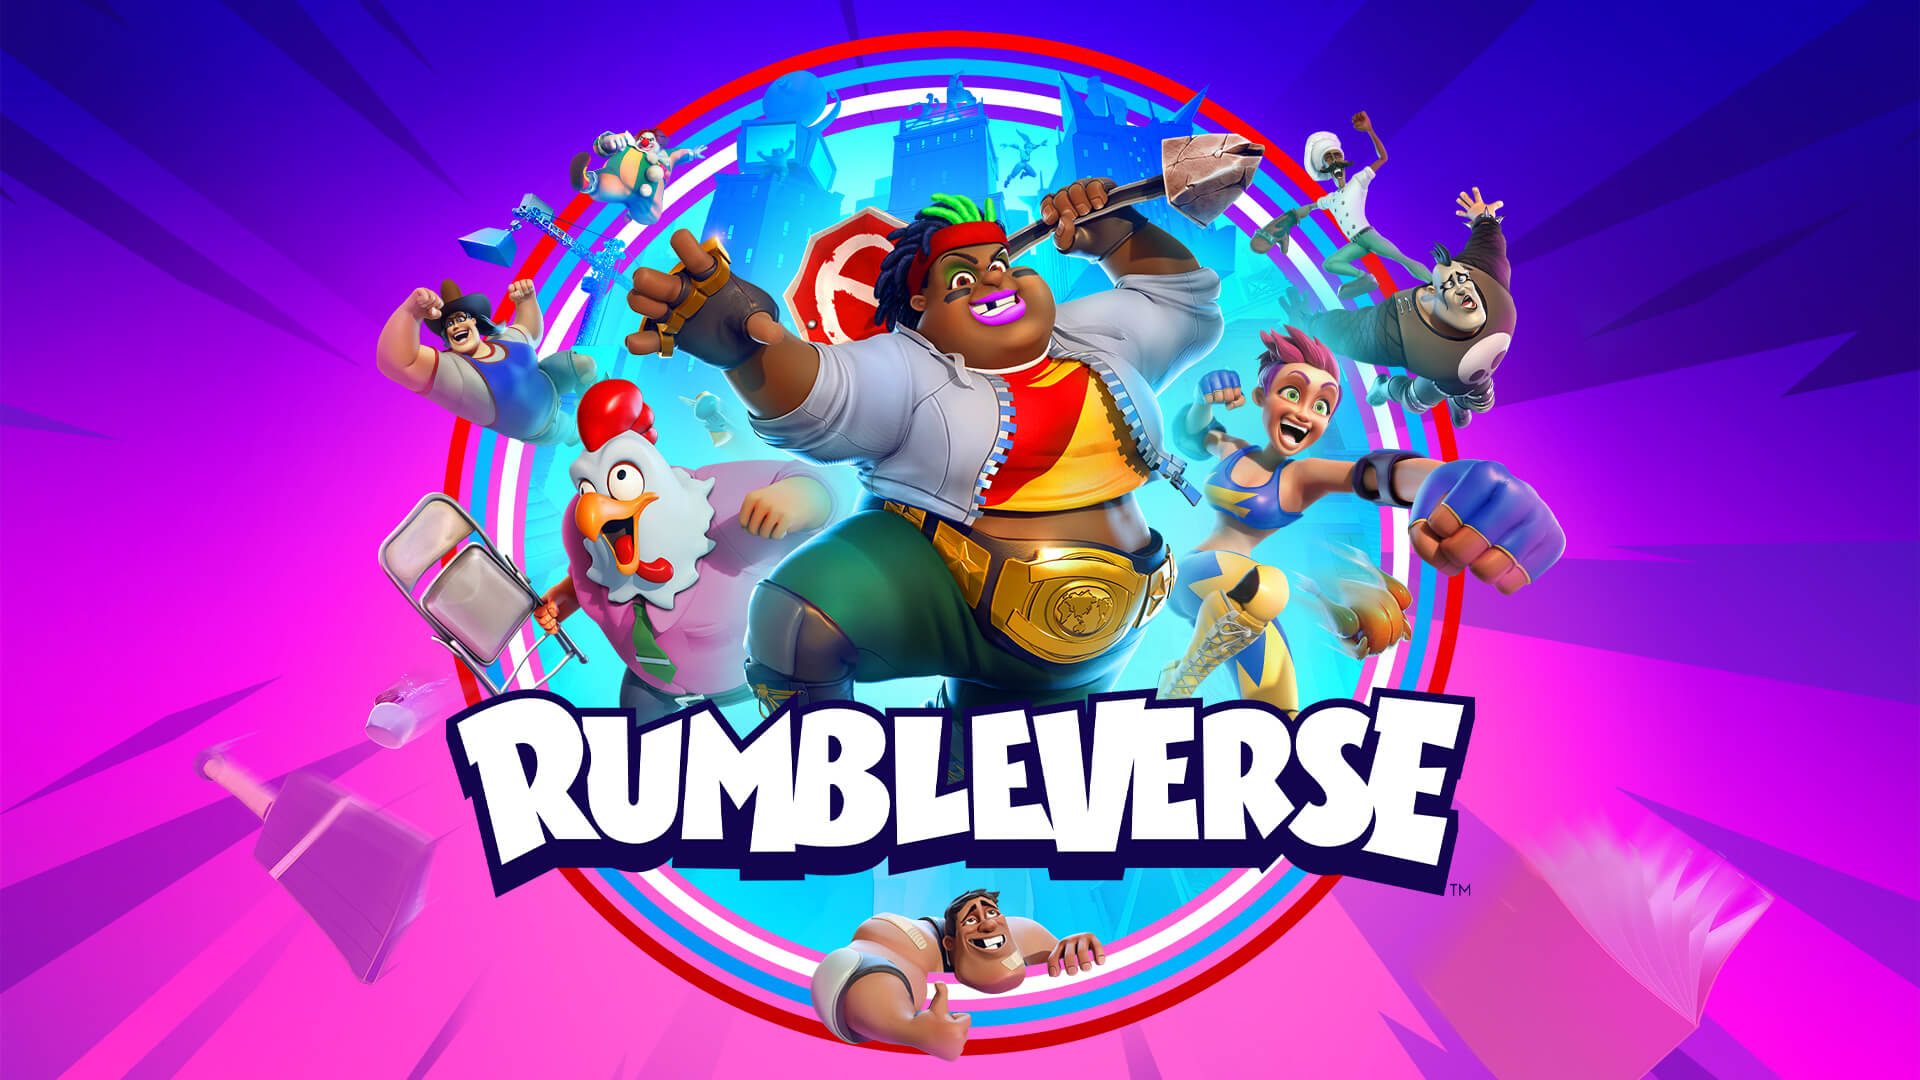 Playground and Duos mode revealed for Rumbleverse launch, out August 11